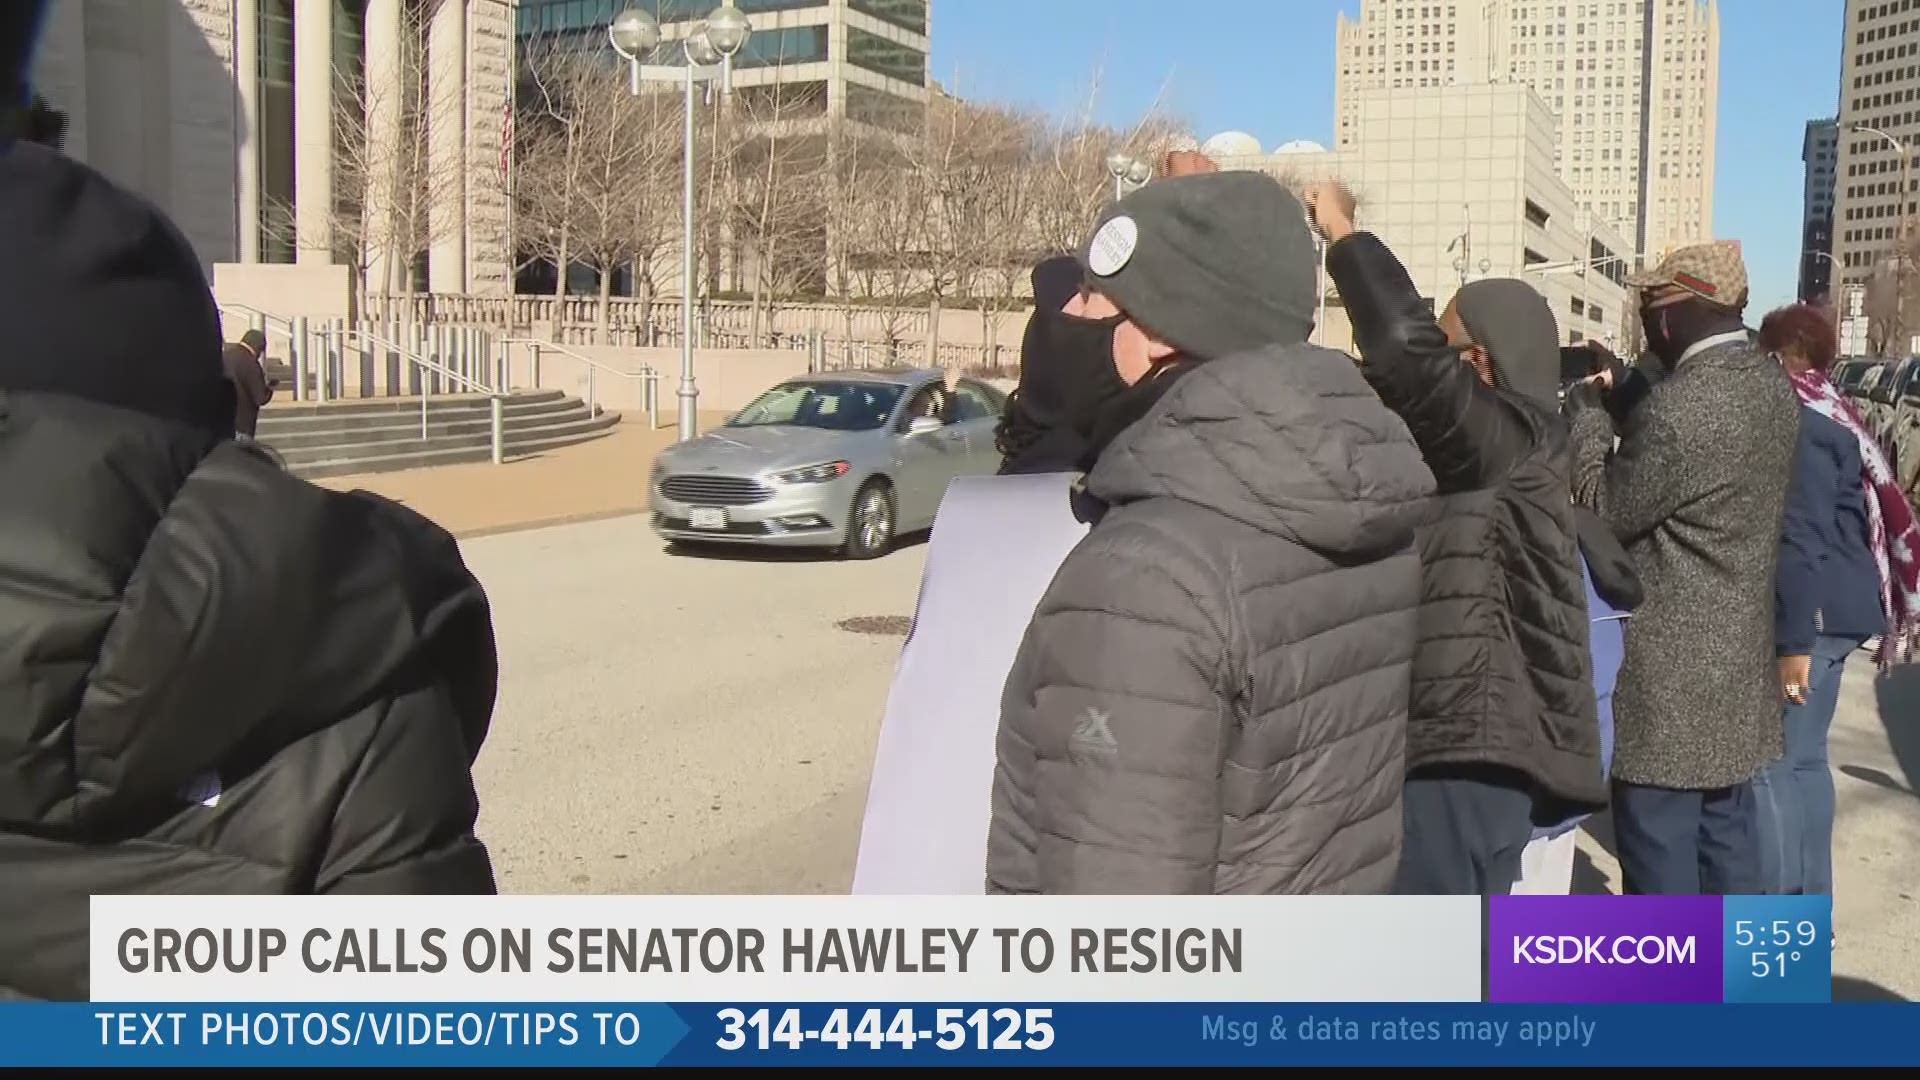 Hawley has said he will not step down as pressure continues for his censure, expulsion or resignation